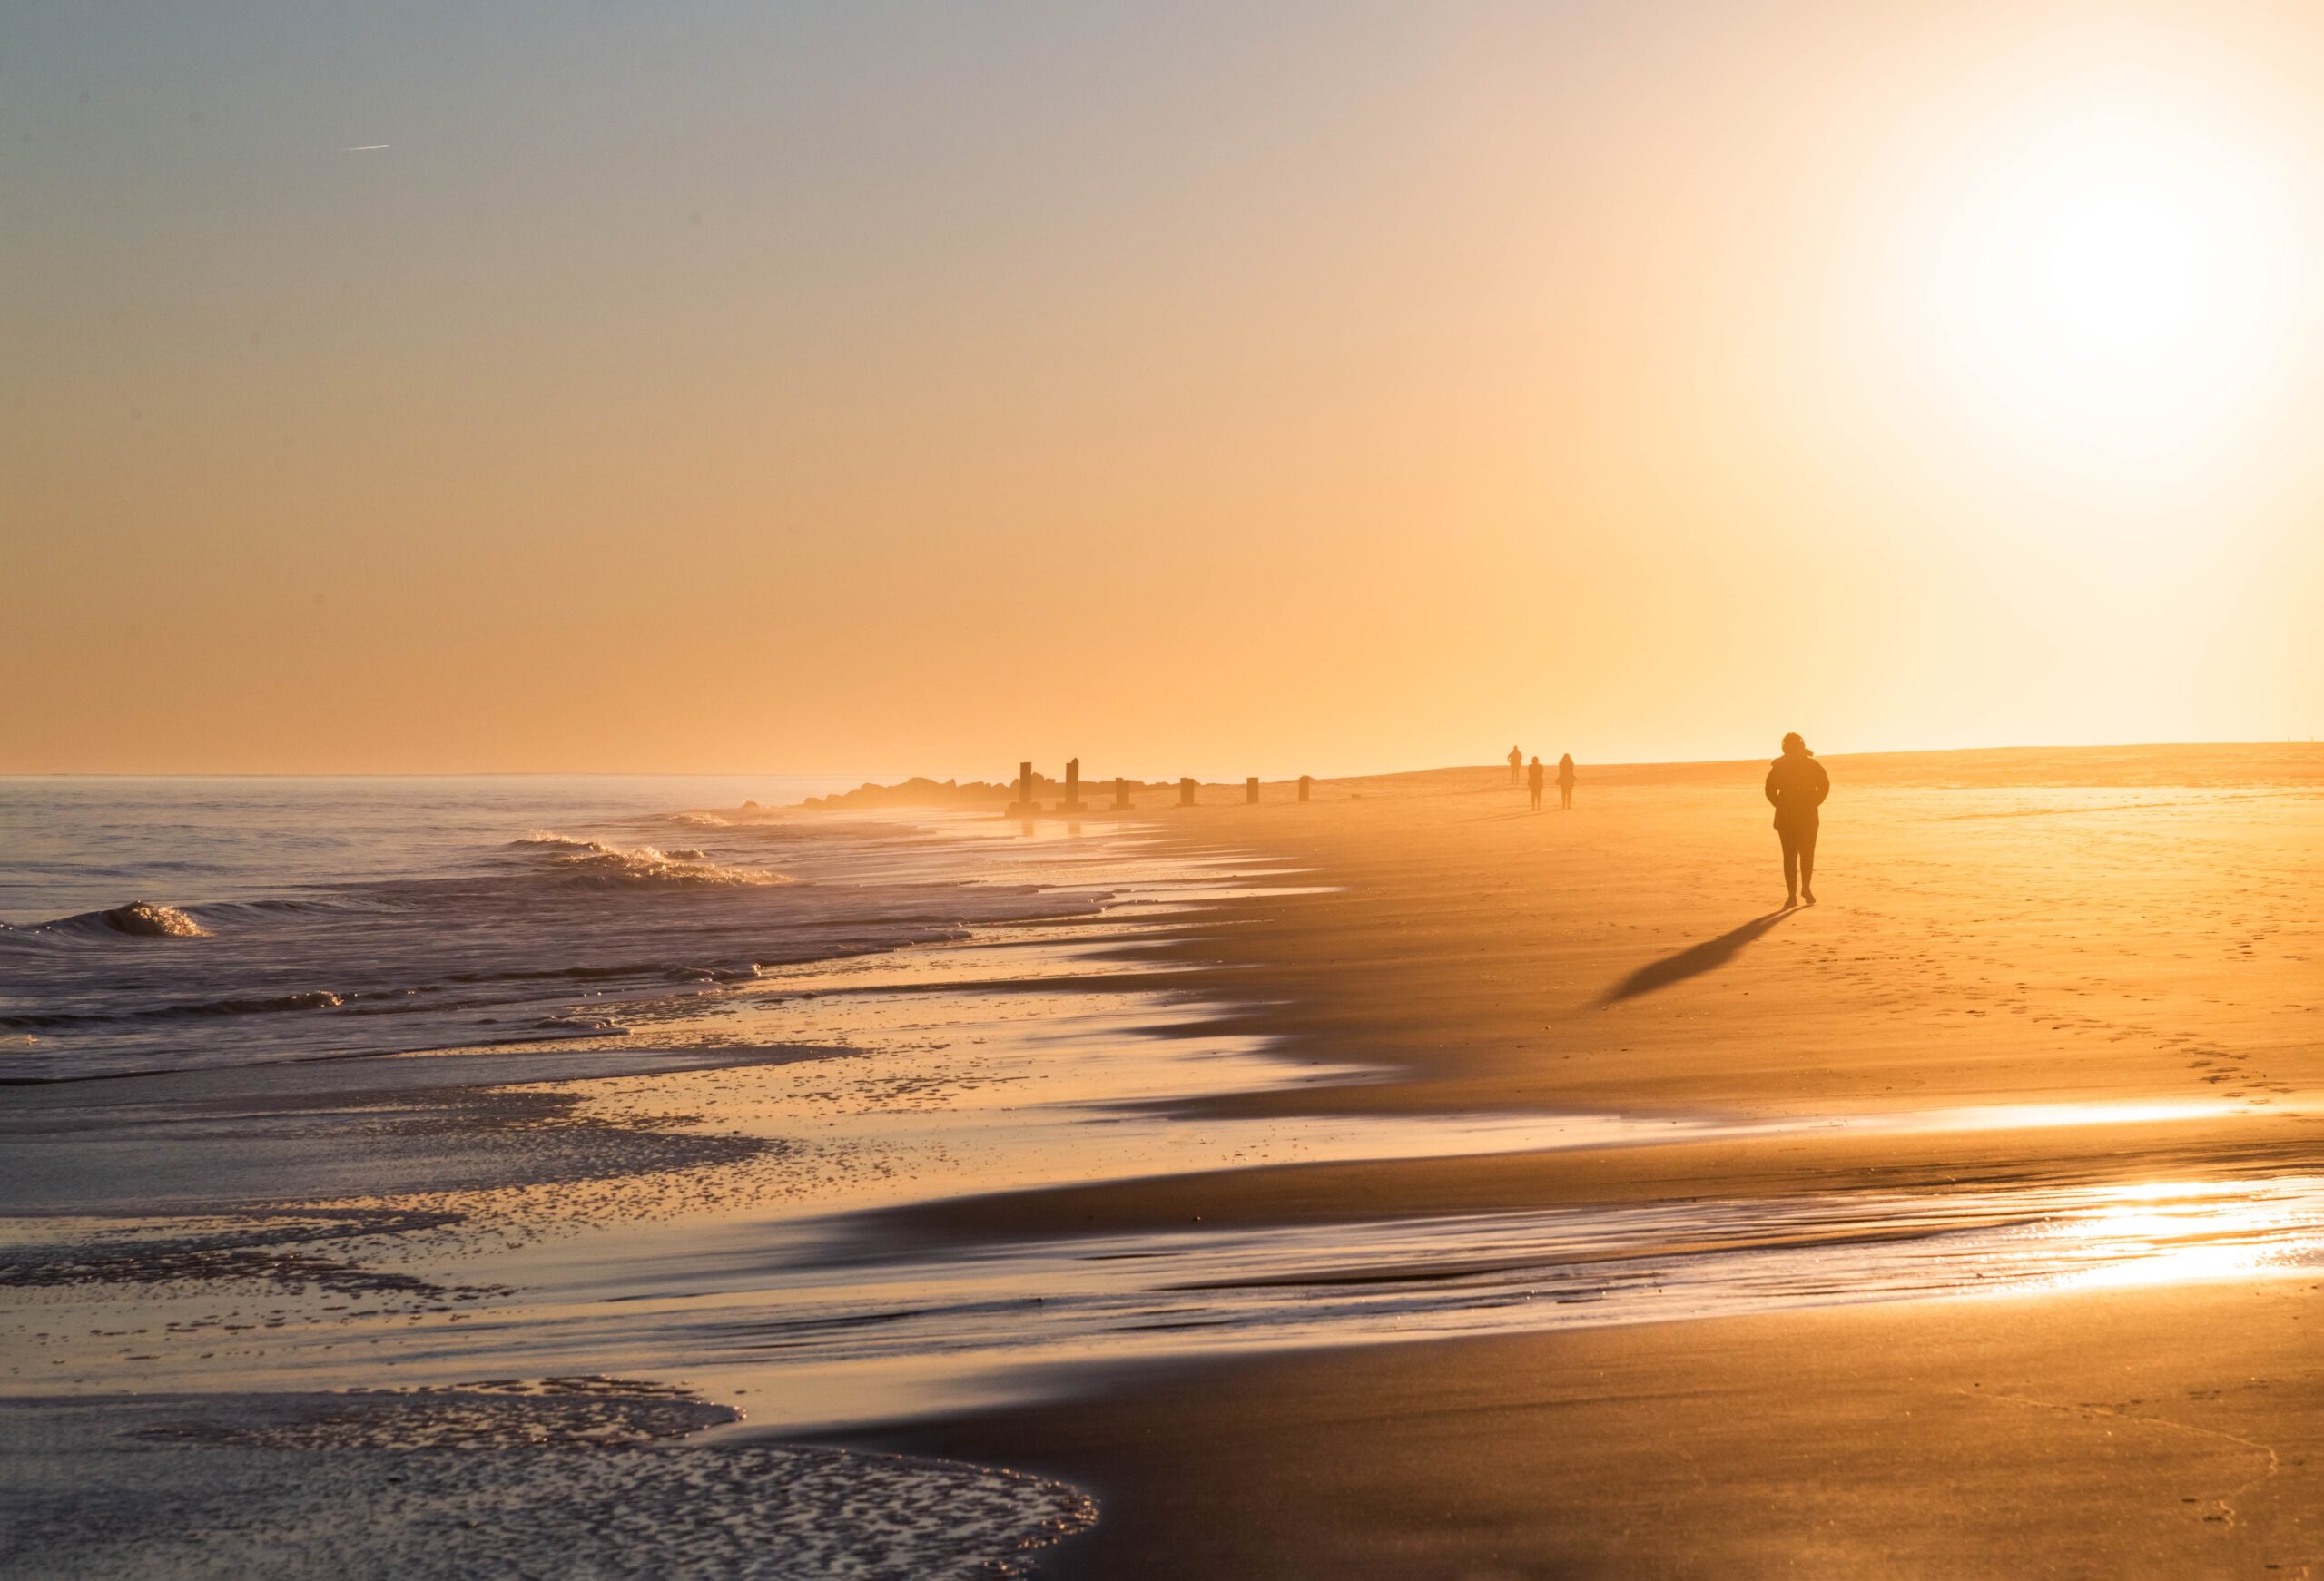 A person walking on the beach by the ocean with a clear sky and the sun shining intensely causing a golden glow on the beach